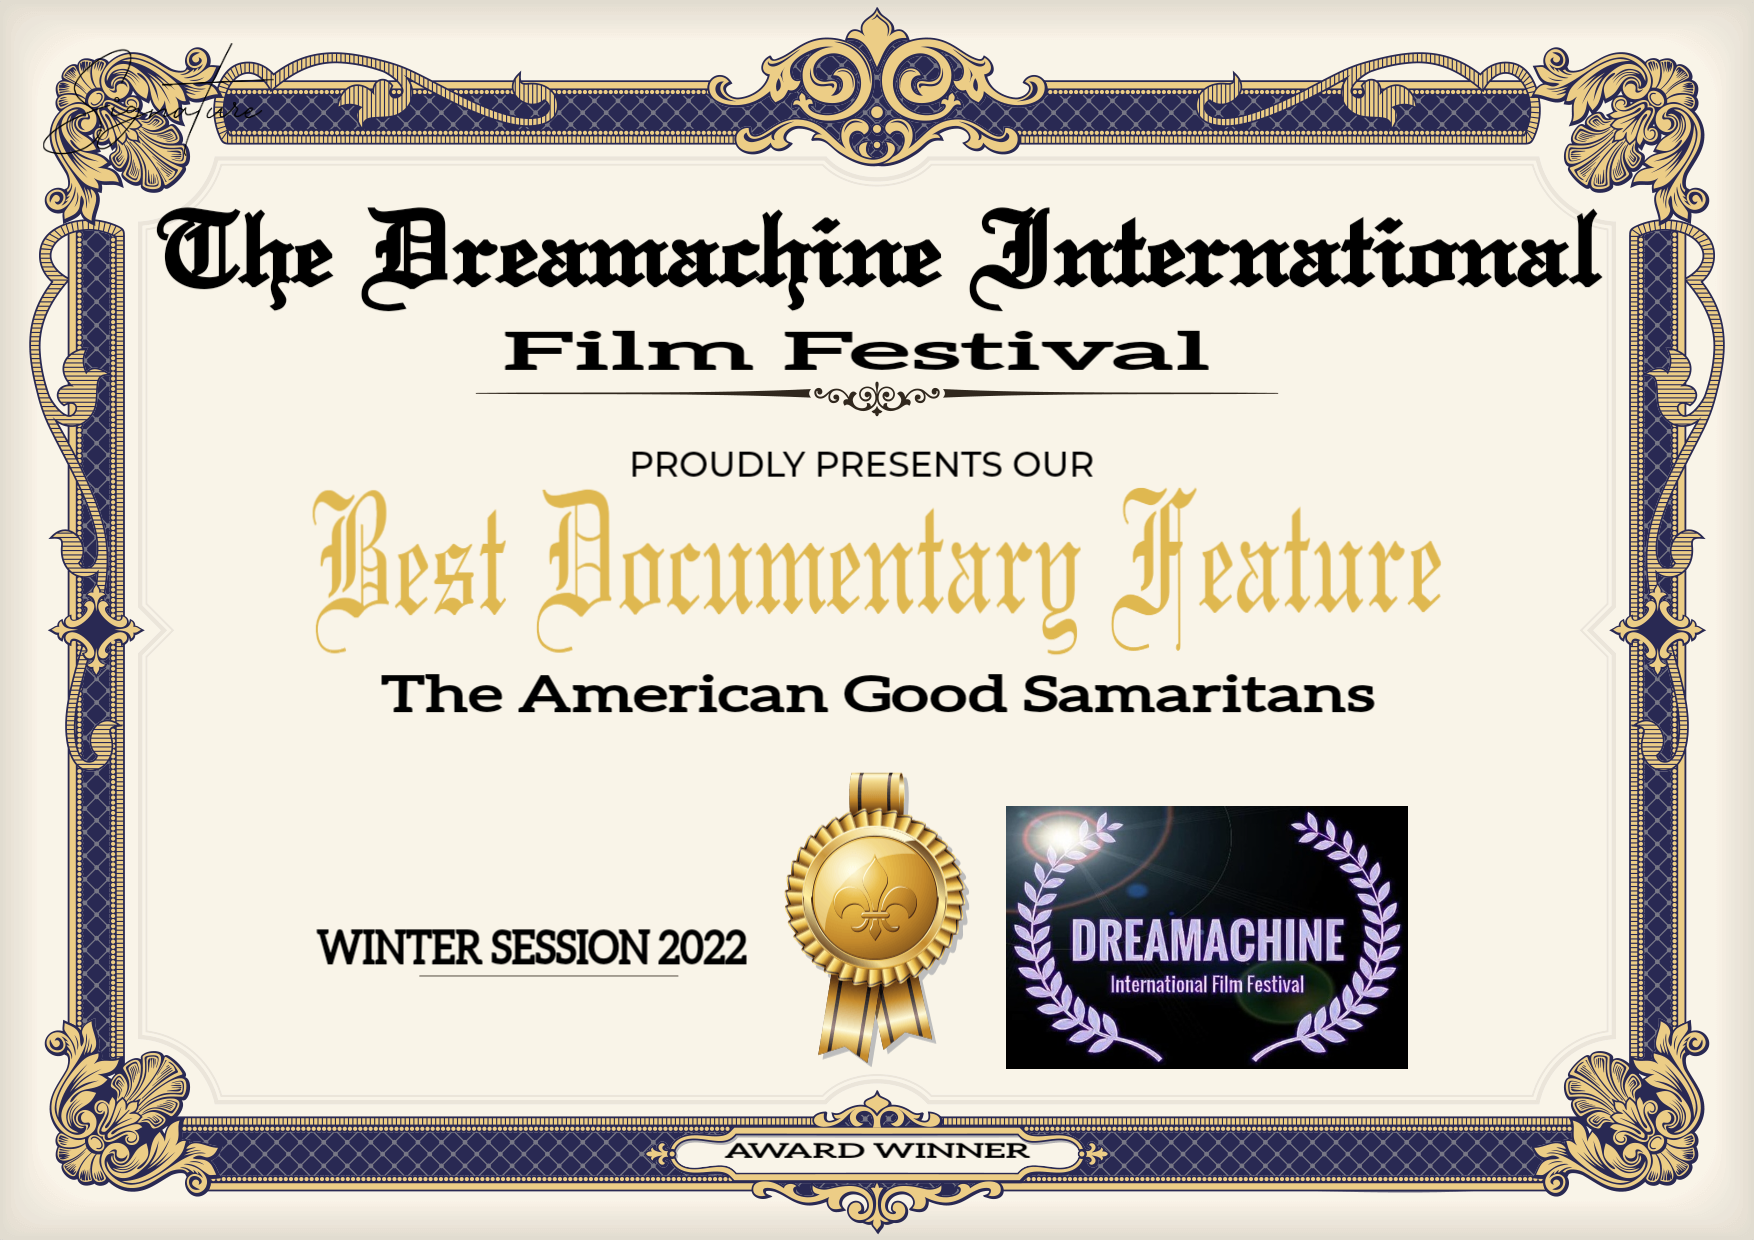 The film The American Good Samaritans is the winner of the 